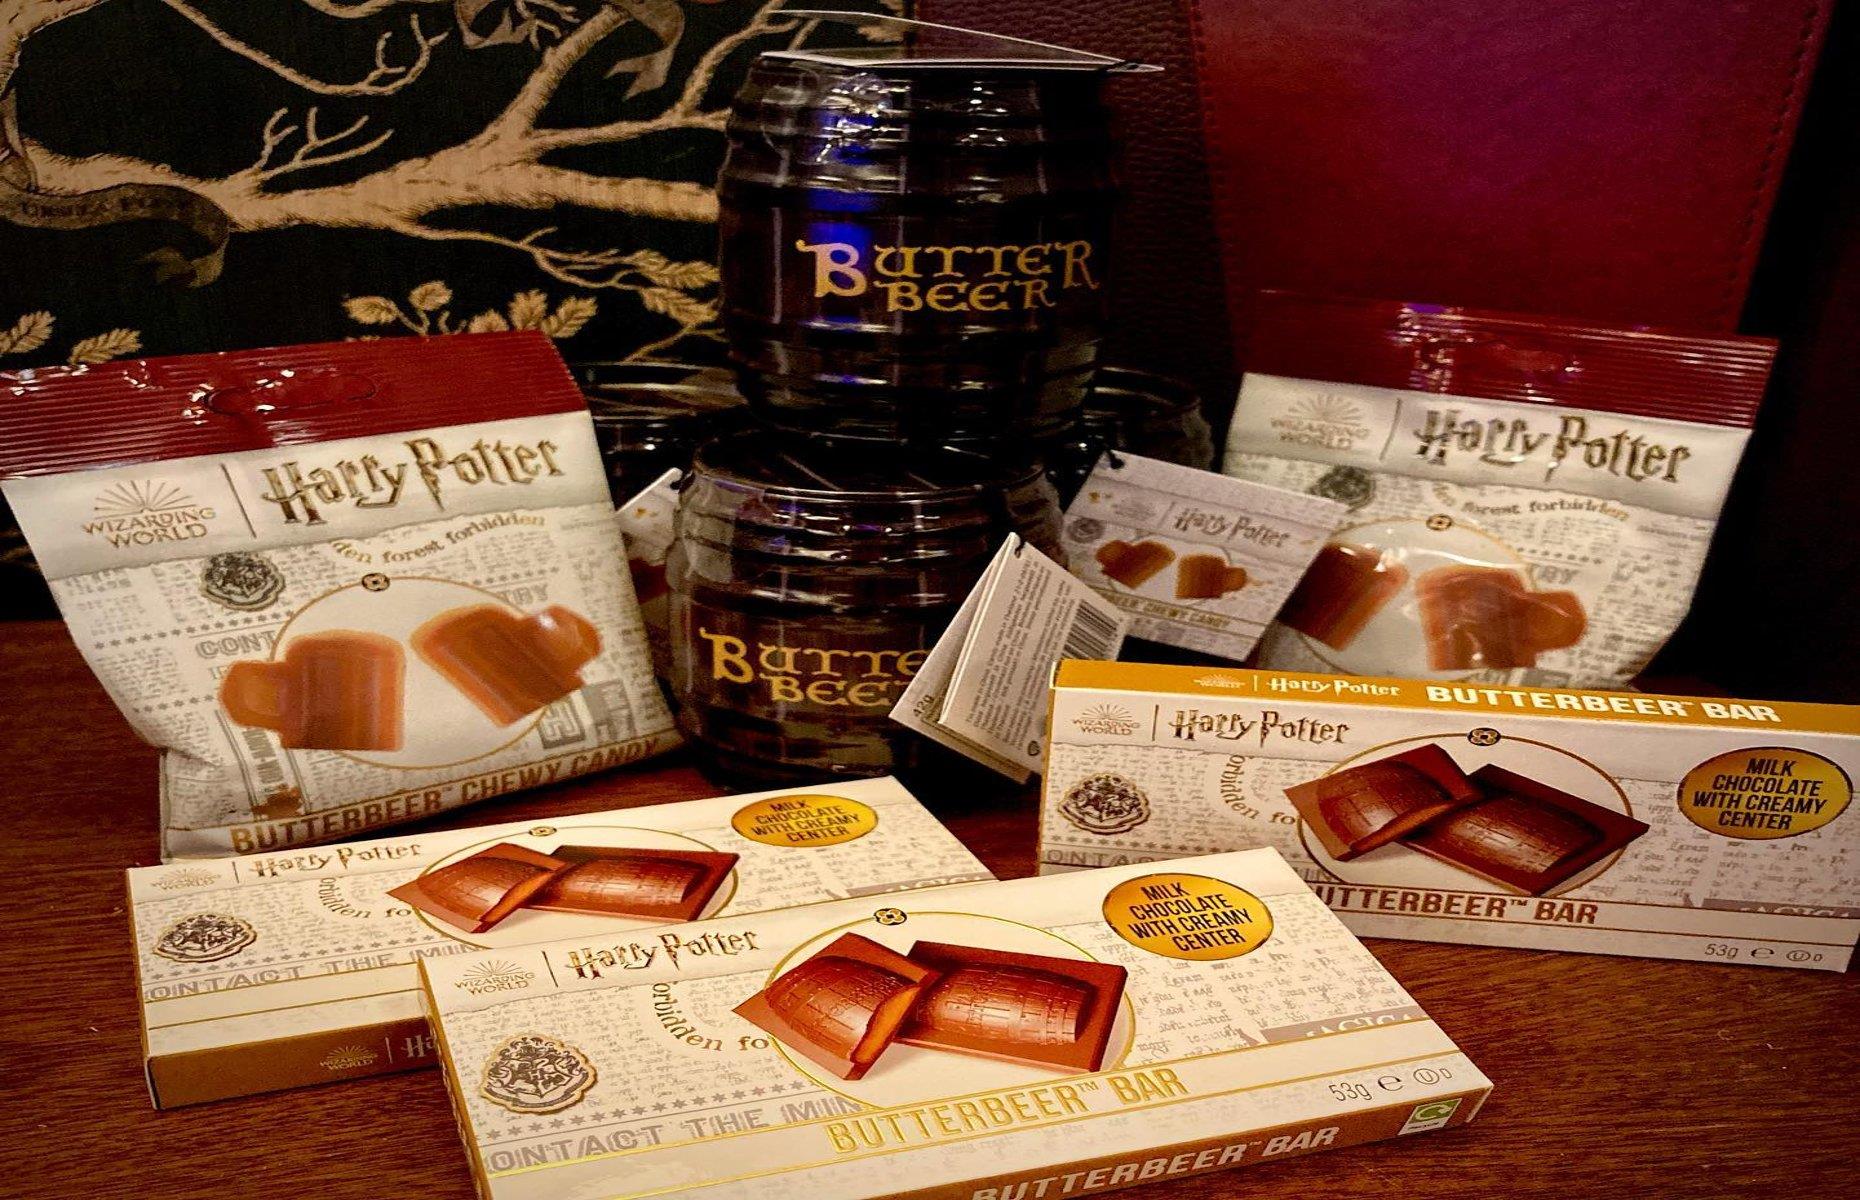 <p>A bewitching array of Potter-inspired food and drinks are on offer at this enchanting <a href="https://www.phoenixbookcafe.com/">one-of-a-kind café bookshop</a>, including Moony’s Chocolate Mousse, OWL Toast and Molly’s Cauldron Cake (a charming nod to the Weasley matriarch). Fans with an especially sweet tooth should seize the opportunity to stock up on Butterbeer-flavored chocolate bars and chewy candies, too.</p>